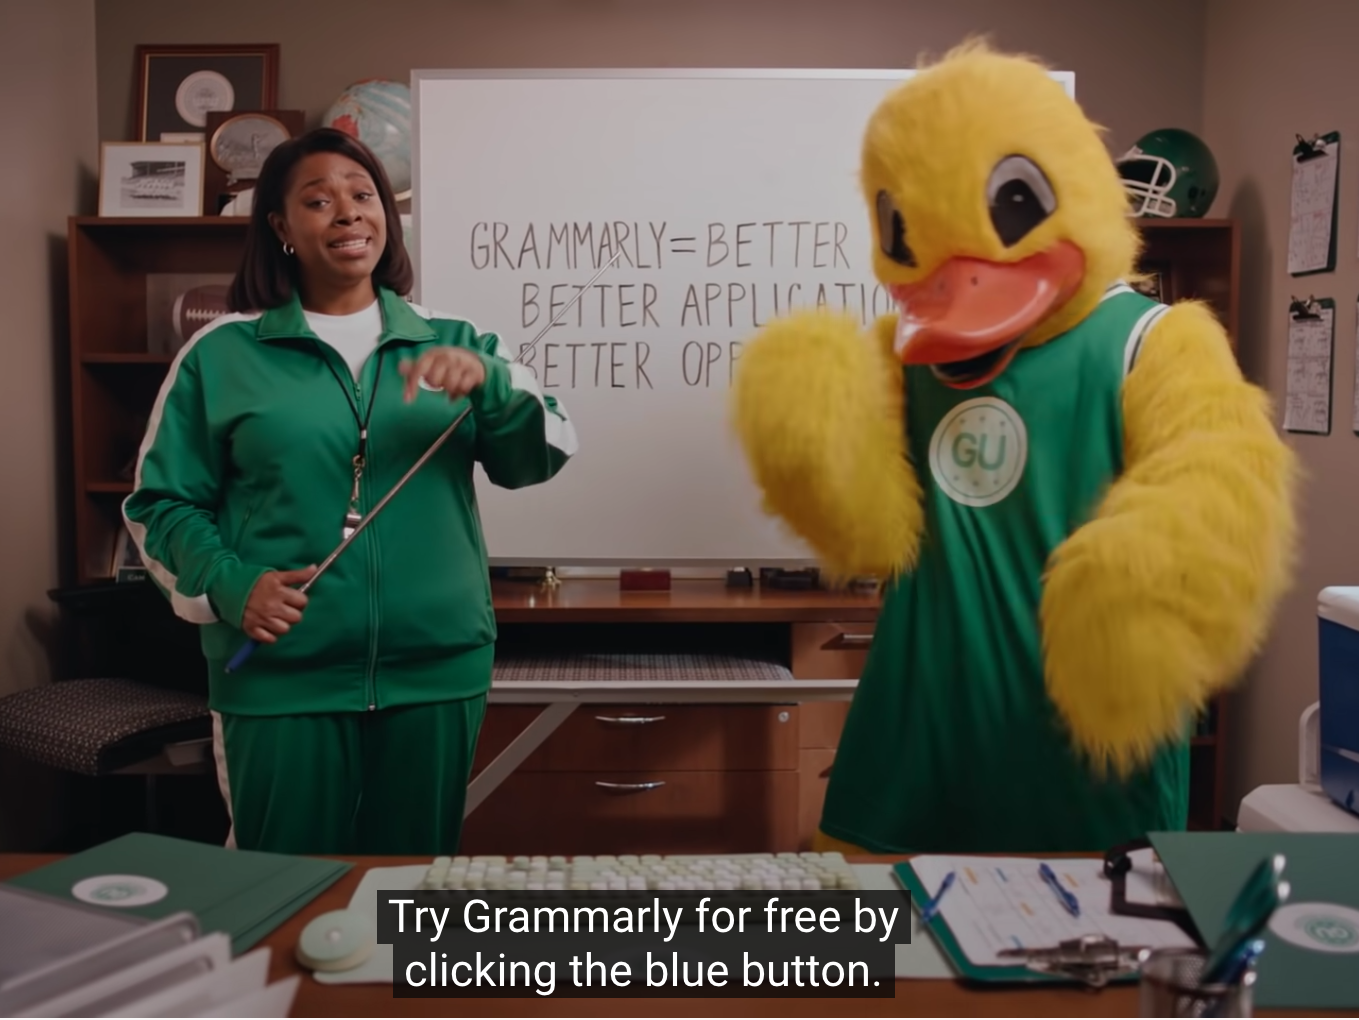 saas video catchy promotional video by Grammarly